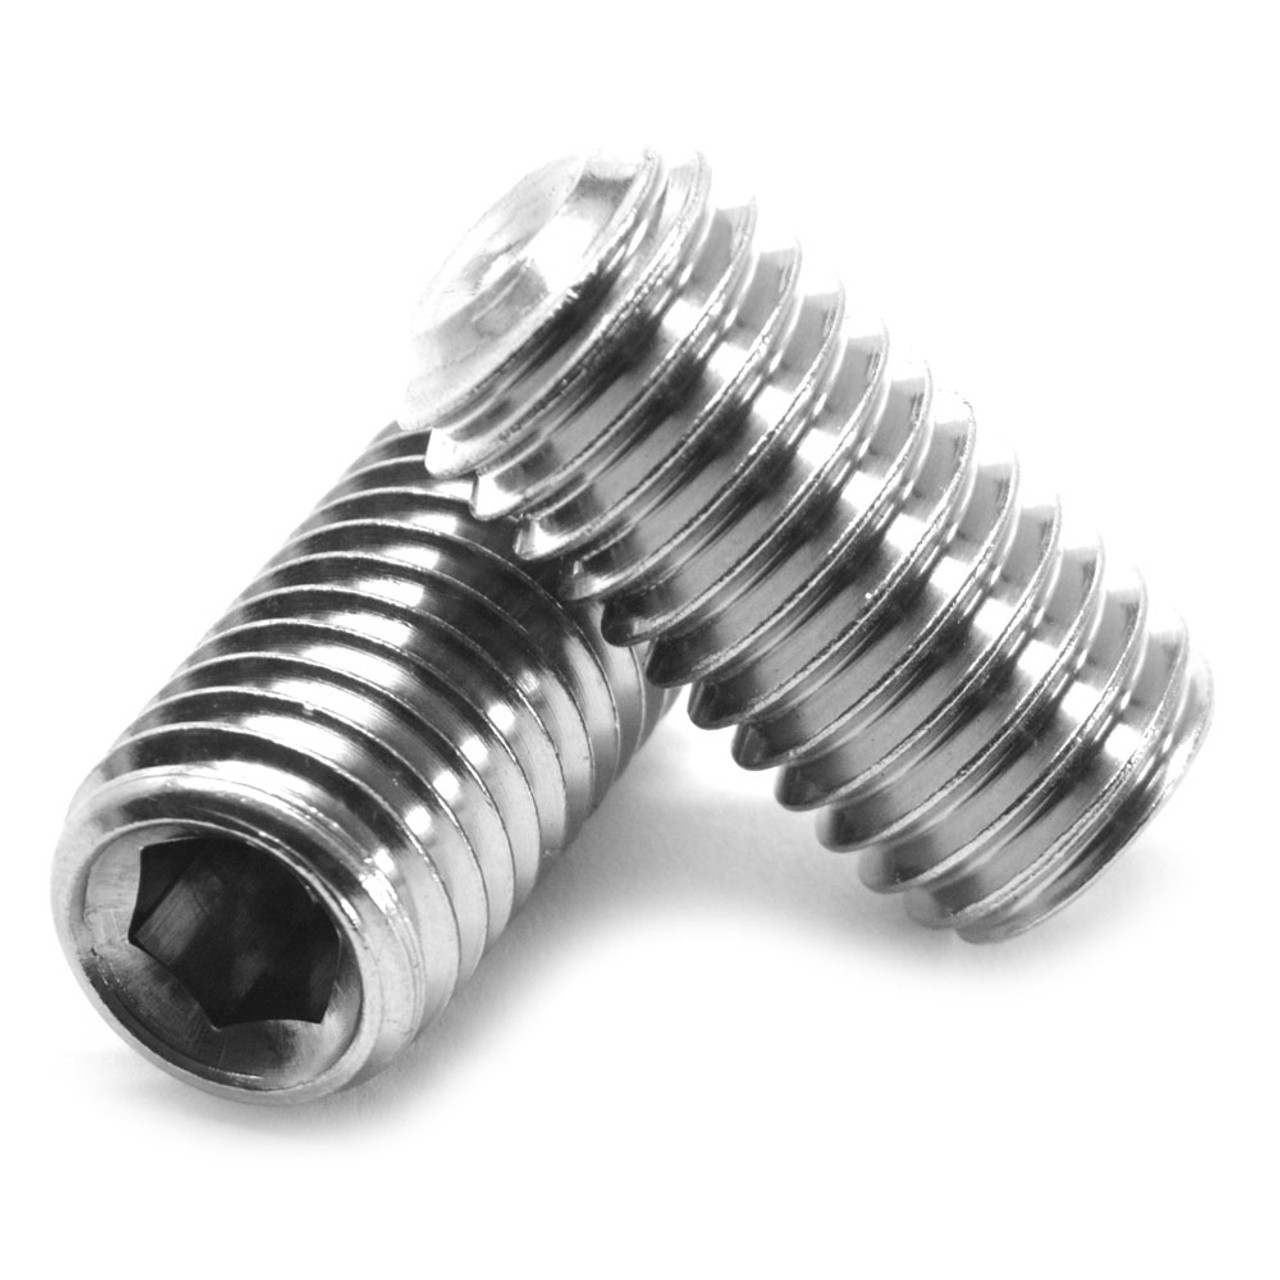 1"-8 x 1" Coarse Thread Socket Set Screw Cup Point Stainless Steel 18-8